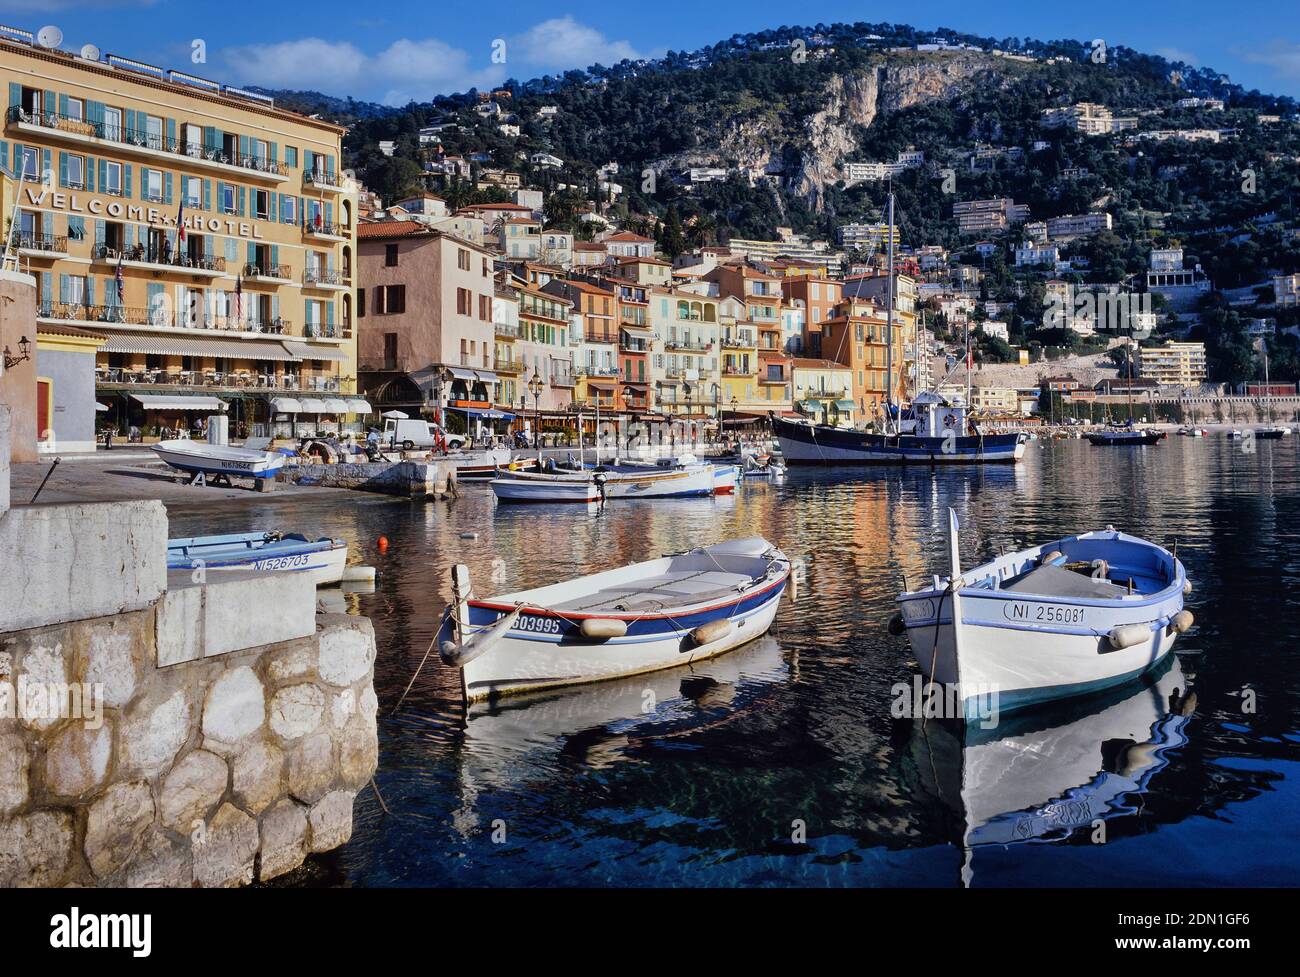 The waterfront of Villefranche-sur-Mer, Provence-Alpes-Côte dAzur region, South of France Stock Photo